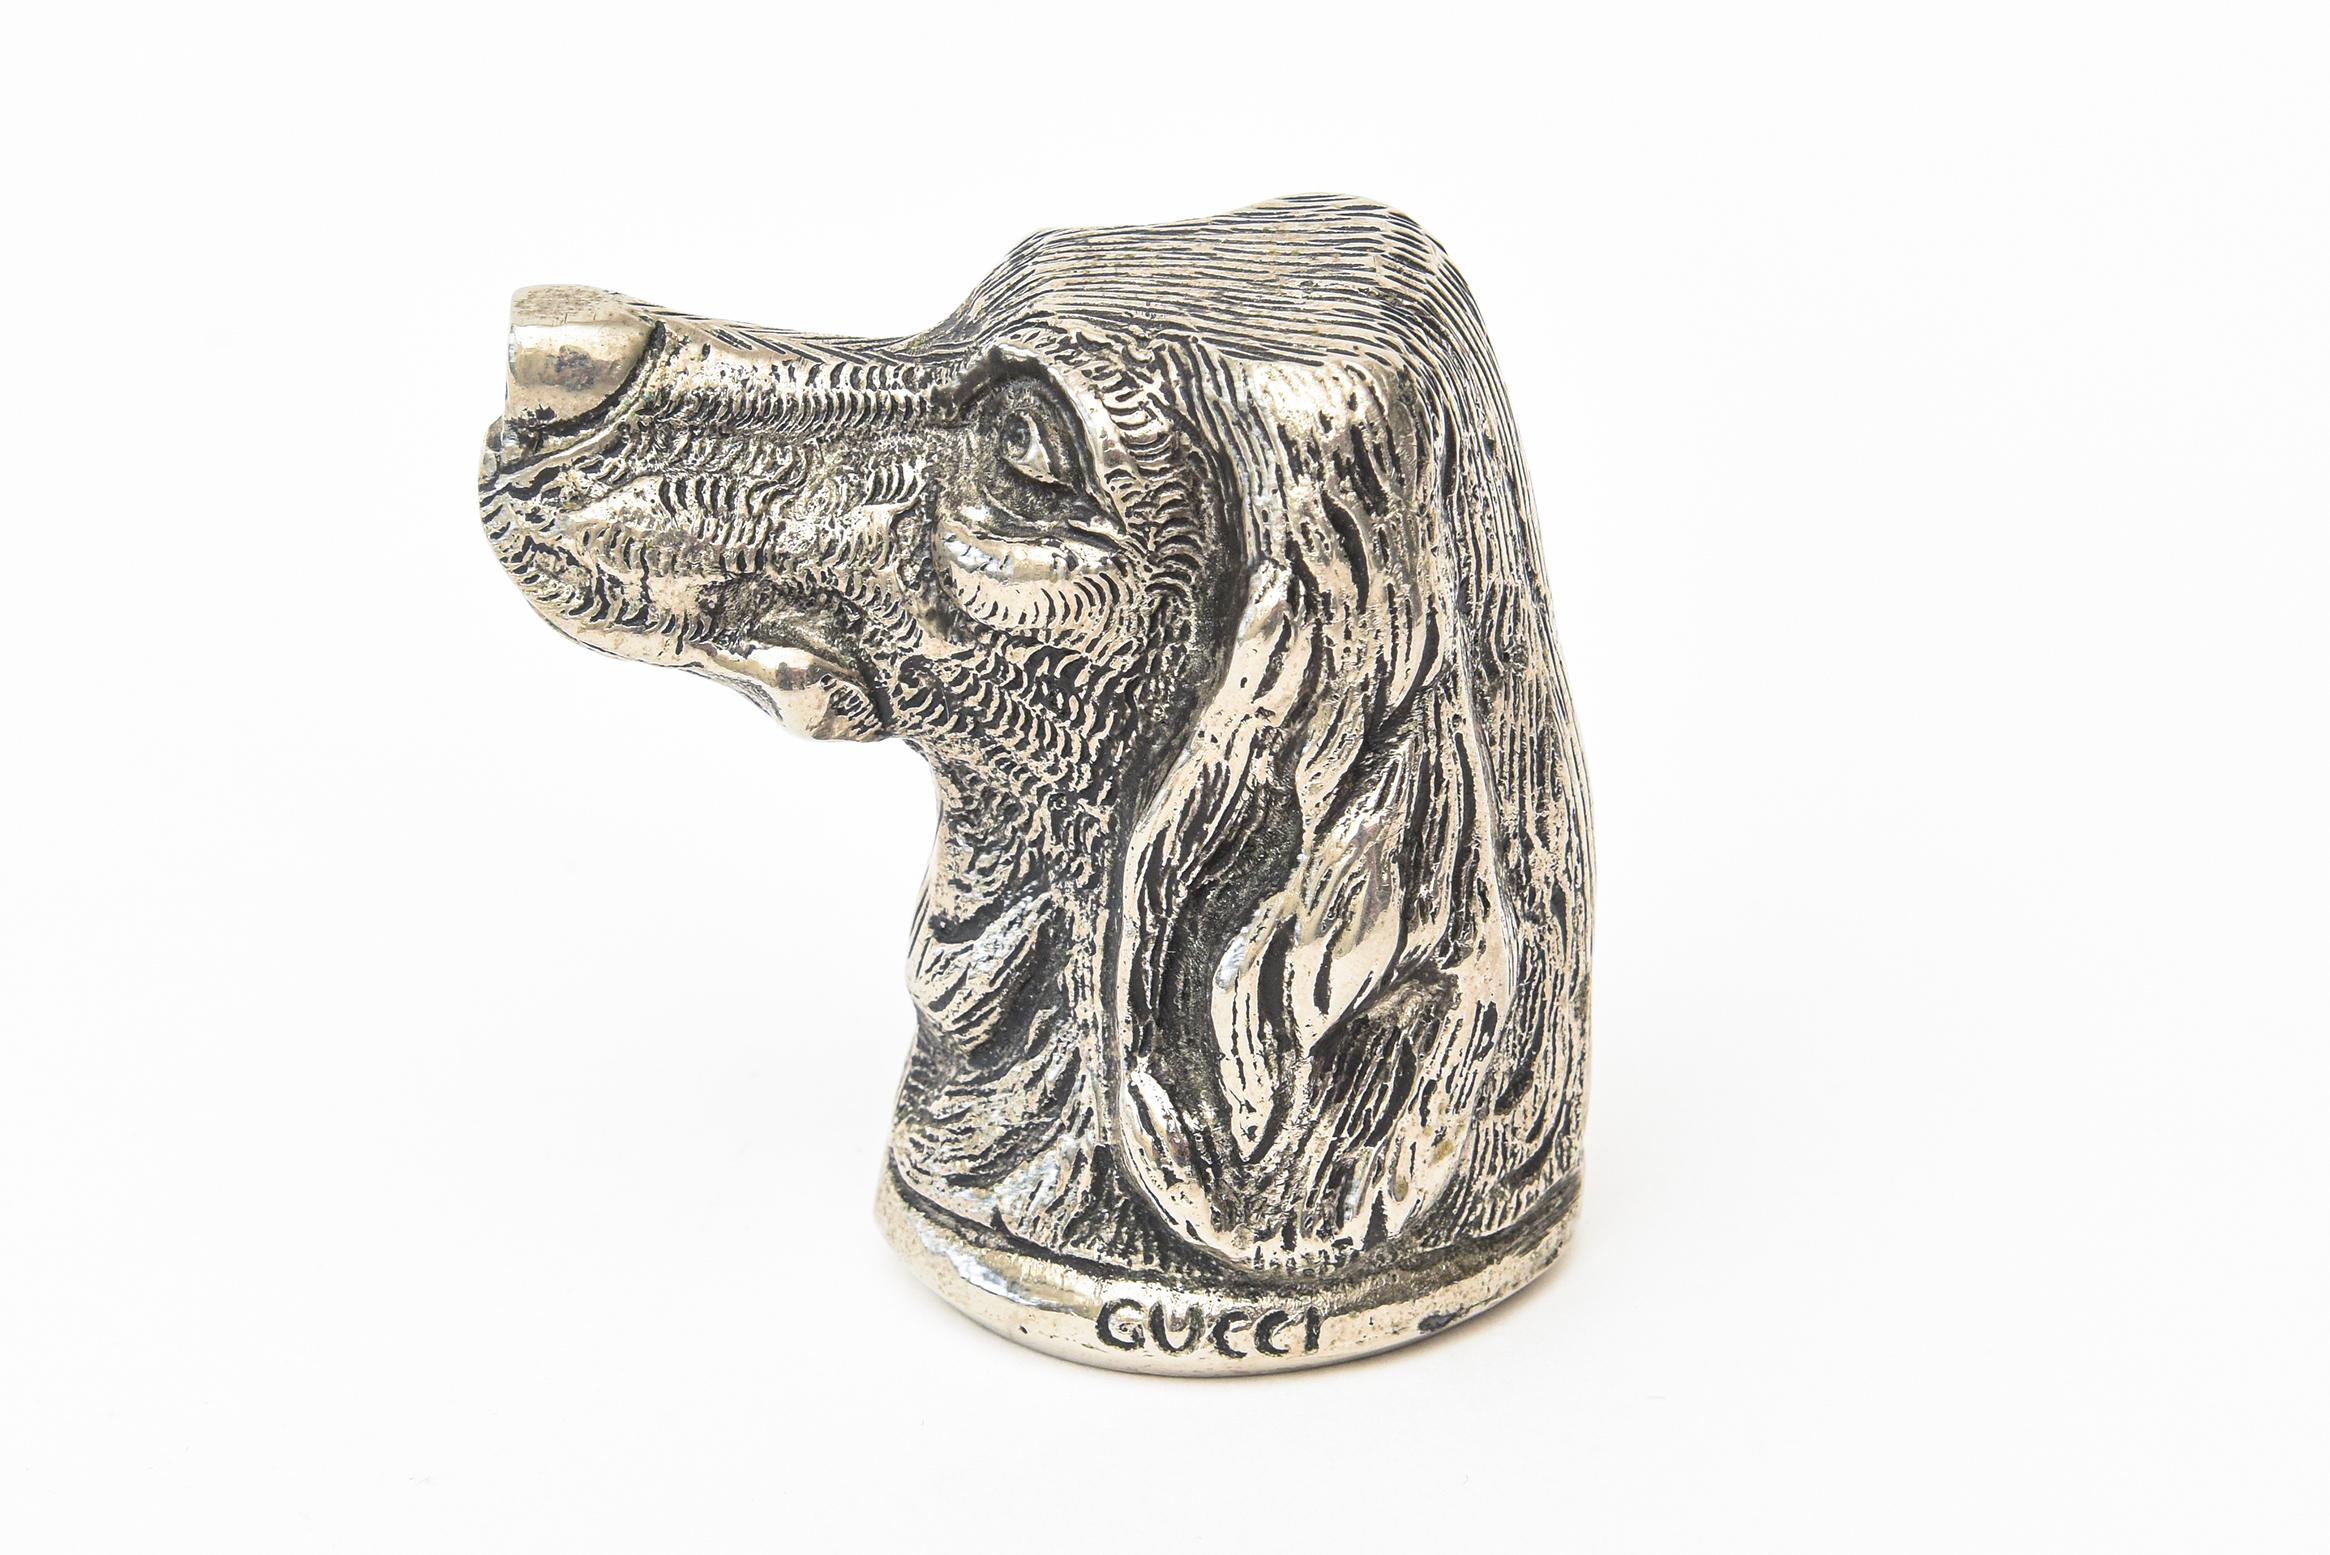 This delightful vintage Italian signed Gucci dog head bottle opener is from the 1970s. It is silver-plate. This one in particular is more desirable than other animals. The face is so sweet and who does not love a dog? It is hallmarked Italy Gucci.